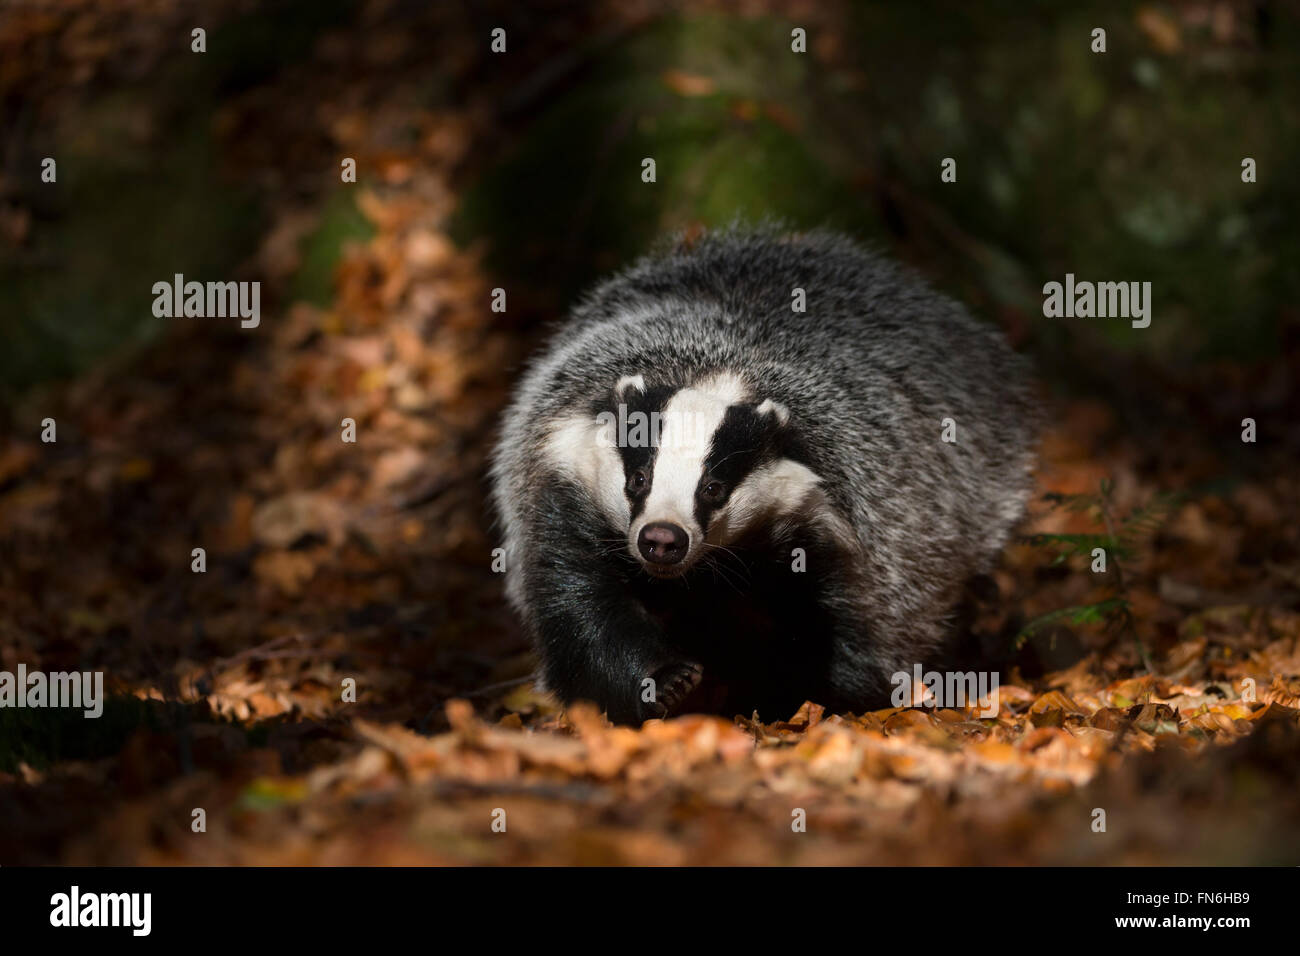 European Badger ( Meles meles ), adult animal, runs through a spotlight on the ground of a forest, looks funny, frontal shot. Stock Photo